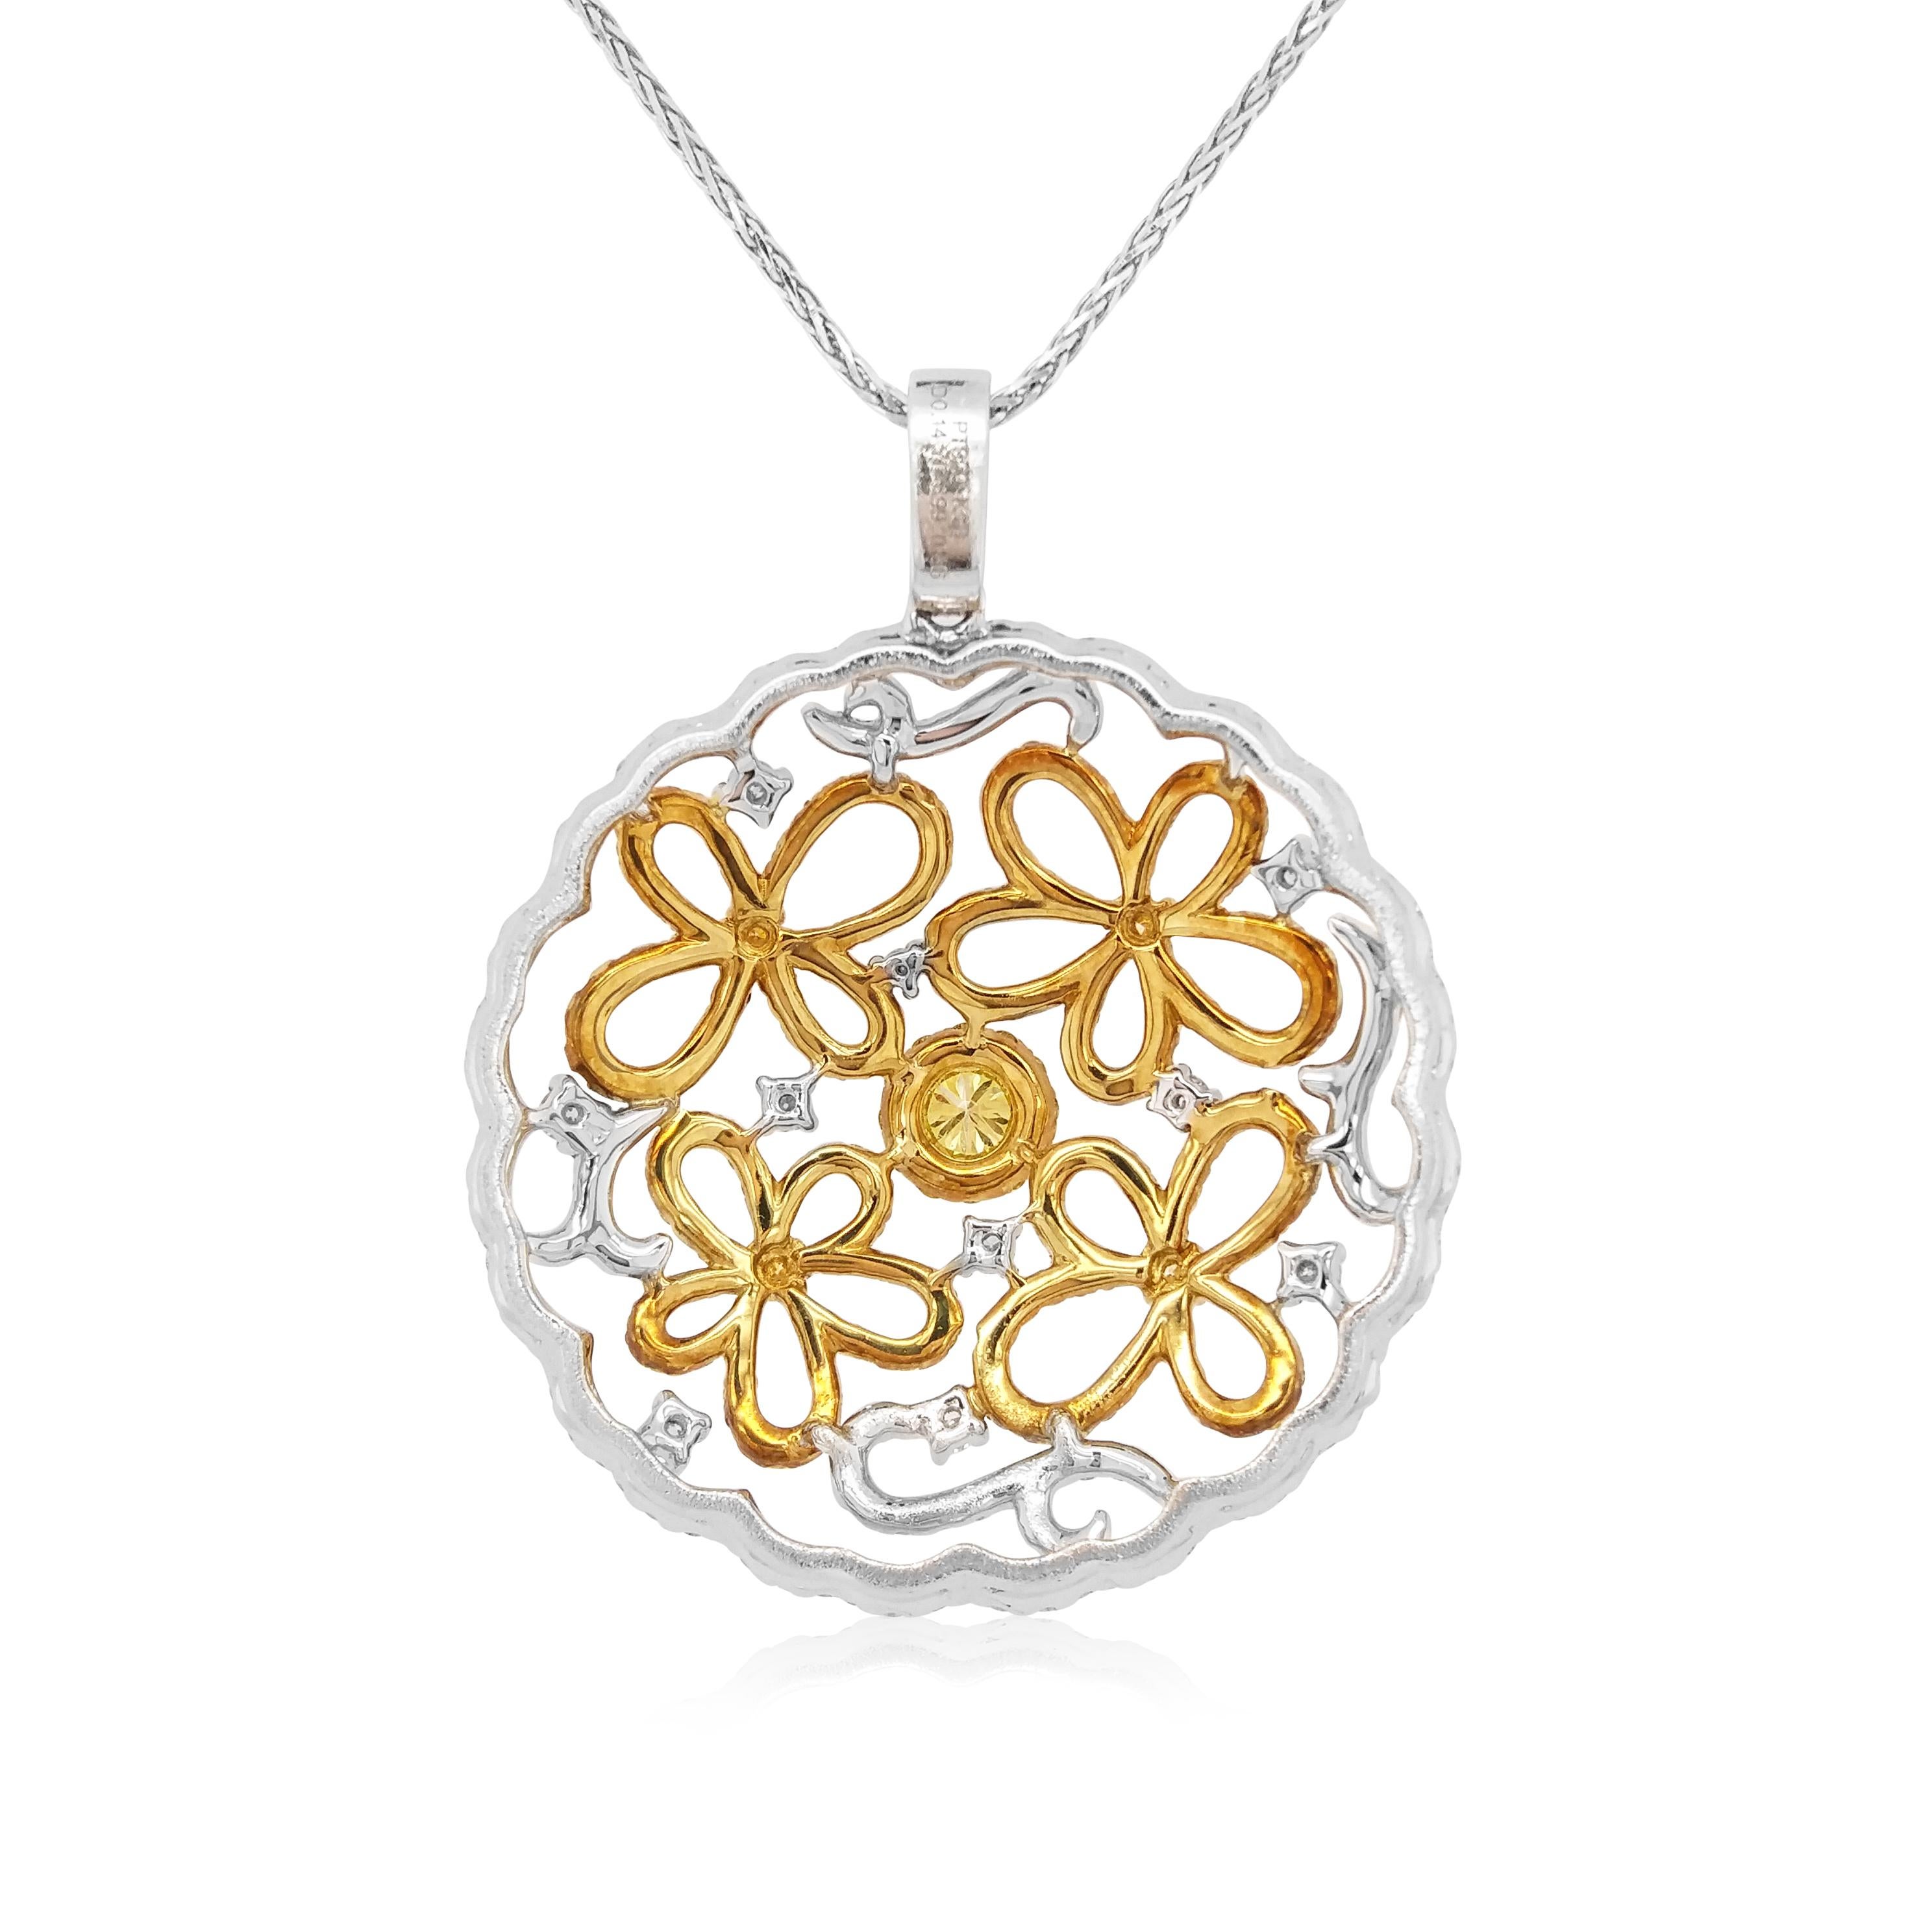 This elegant pendant features a lustrous round shape Yellow Diamond with a scintillating Yellow and White diamonds arrangement. Set in Platinum and 18 Karat Yellow Gold this elegant pendant is contemporary, yet timeless. Perfect to take you from day